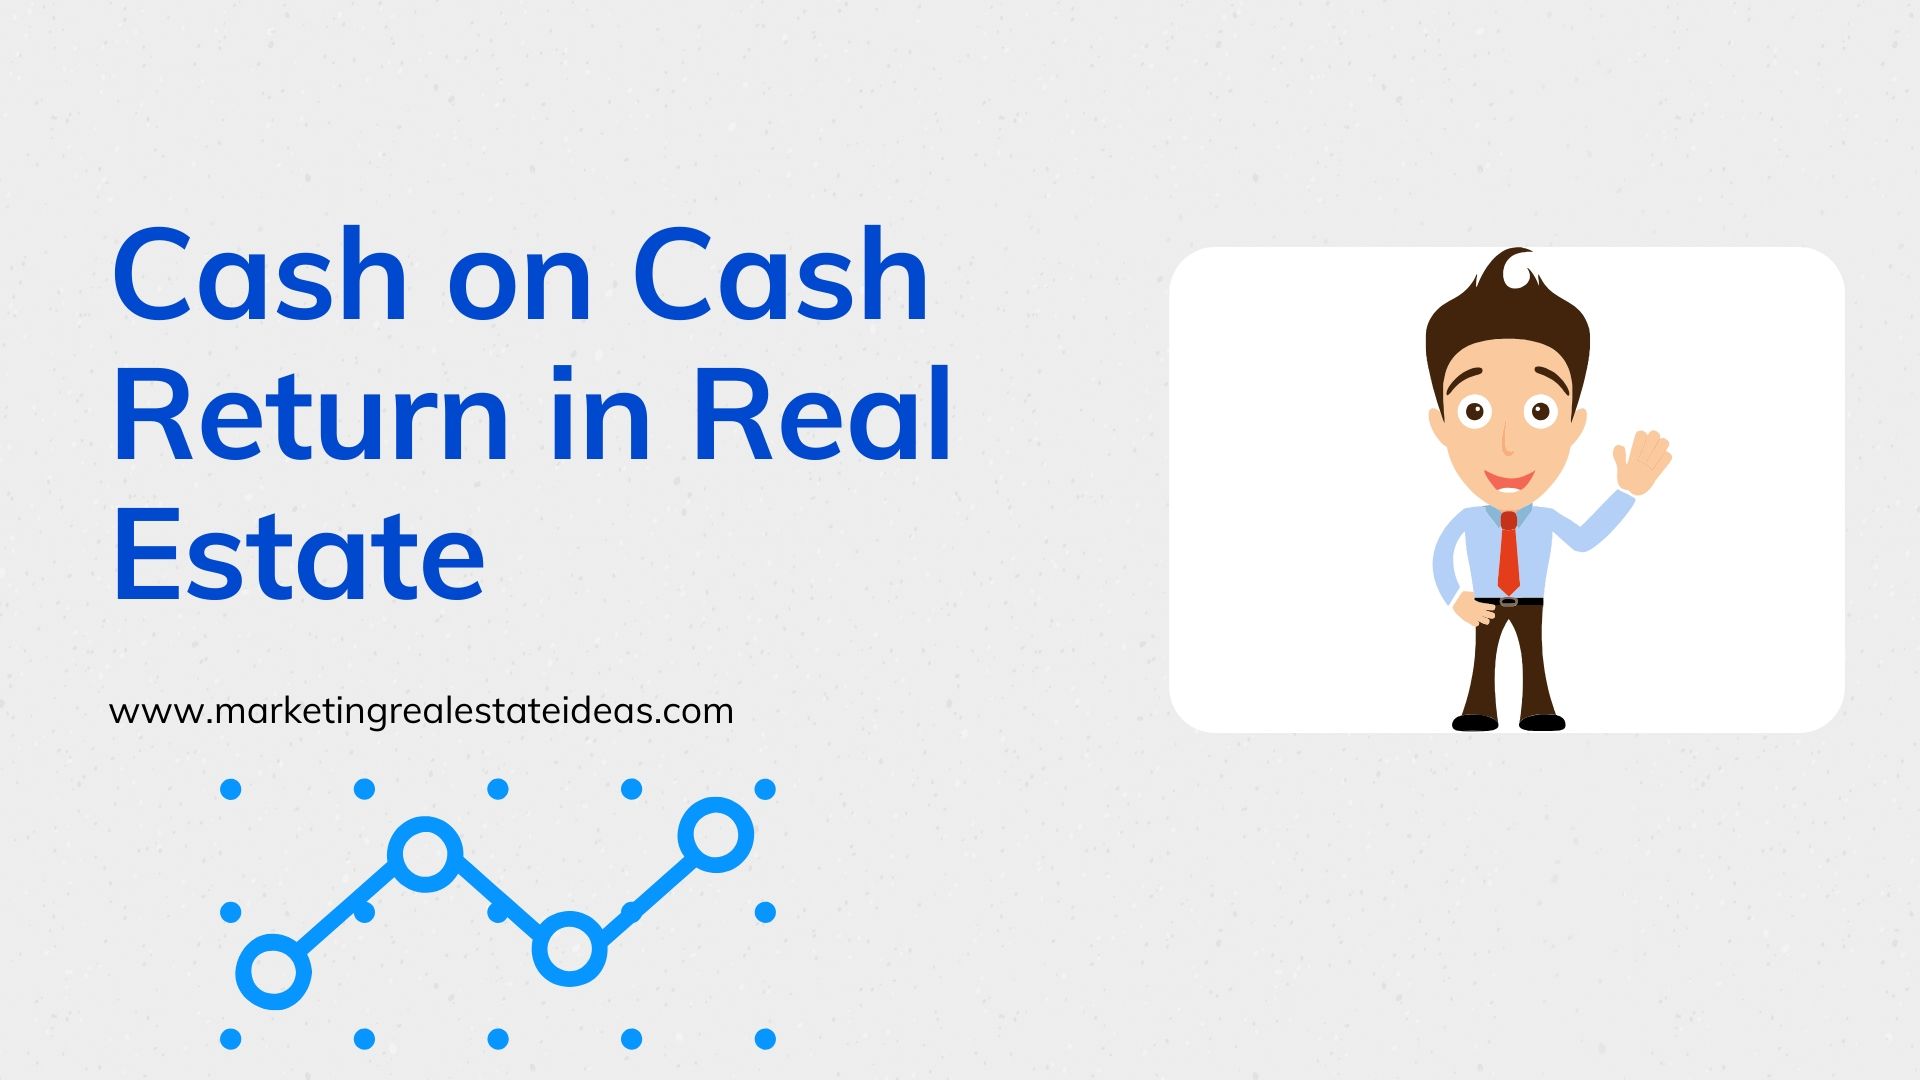 What does cash on cash mean in real estate